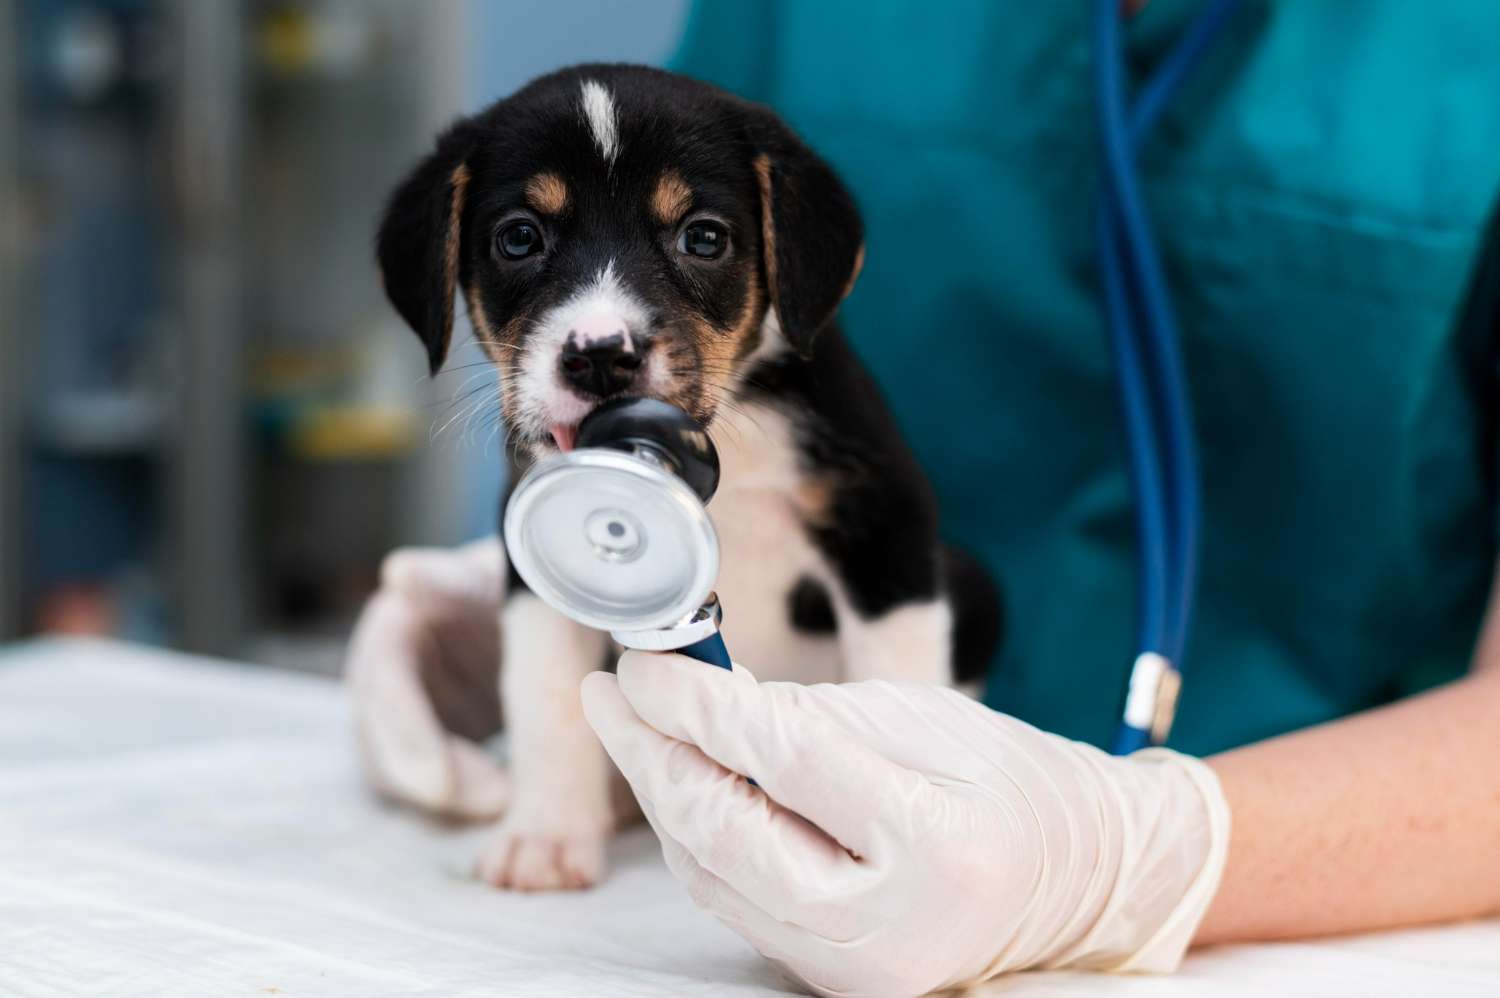 Why are regular check-ups important for pets?